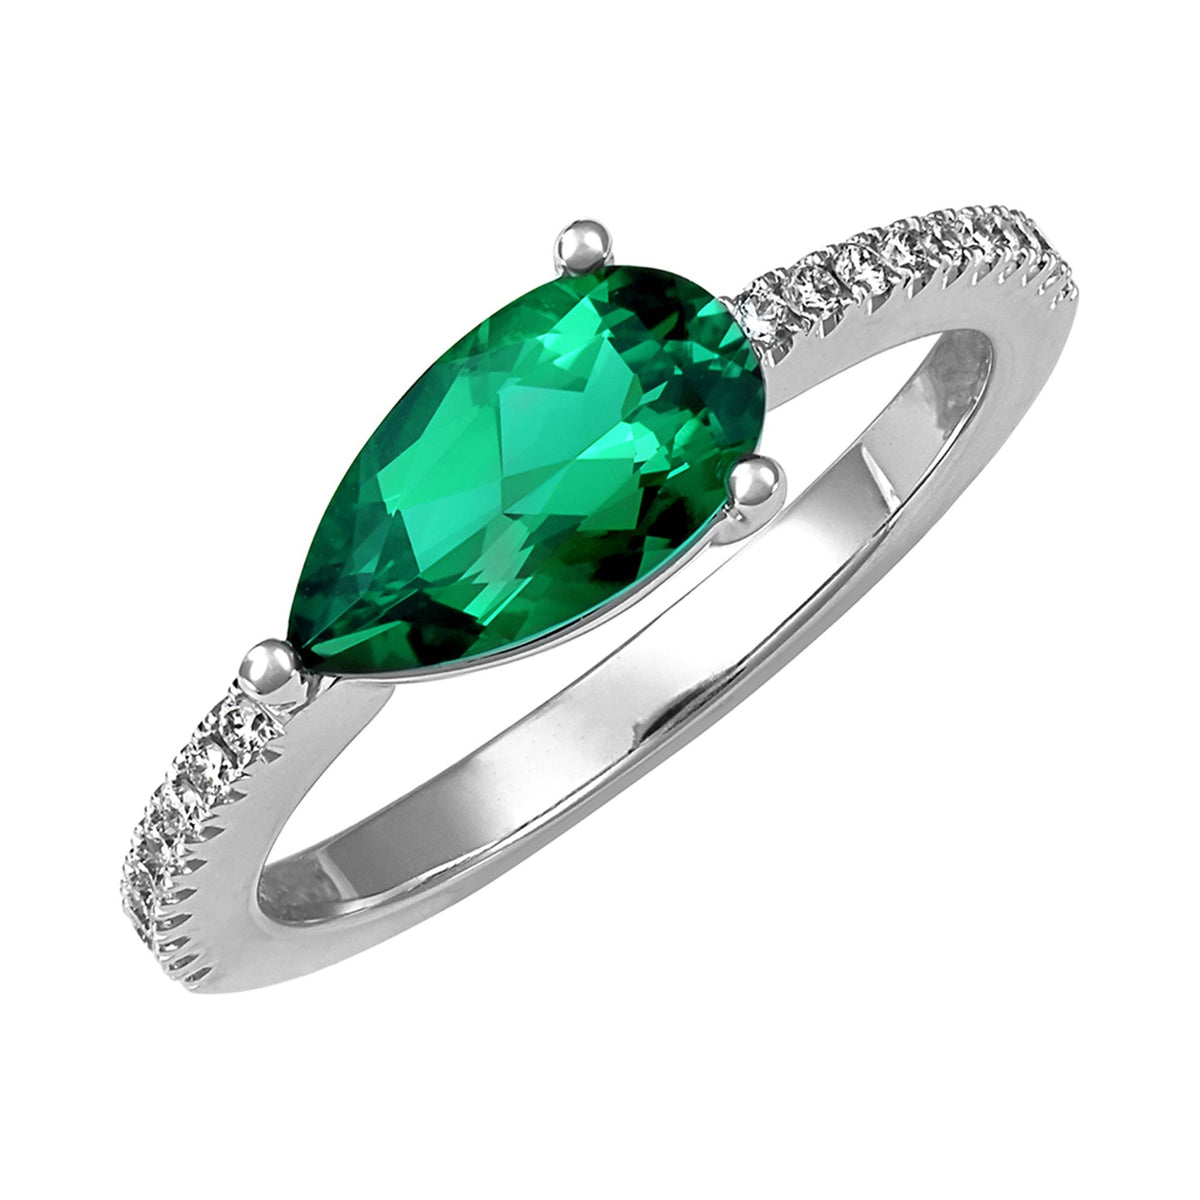 14Kt White Gold Ring With 1.11ct Chatham Lab Created Emerald